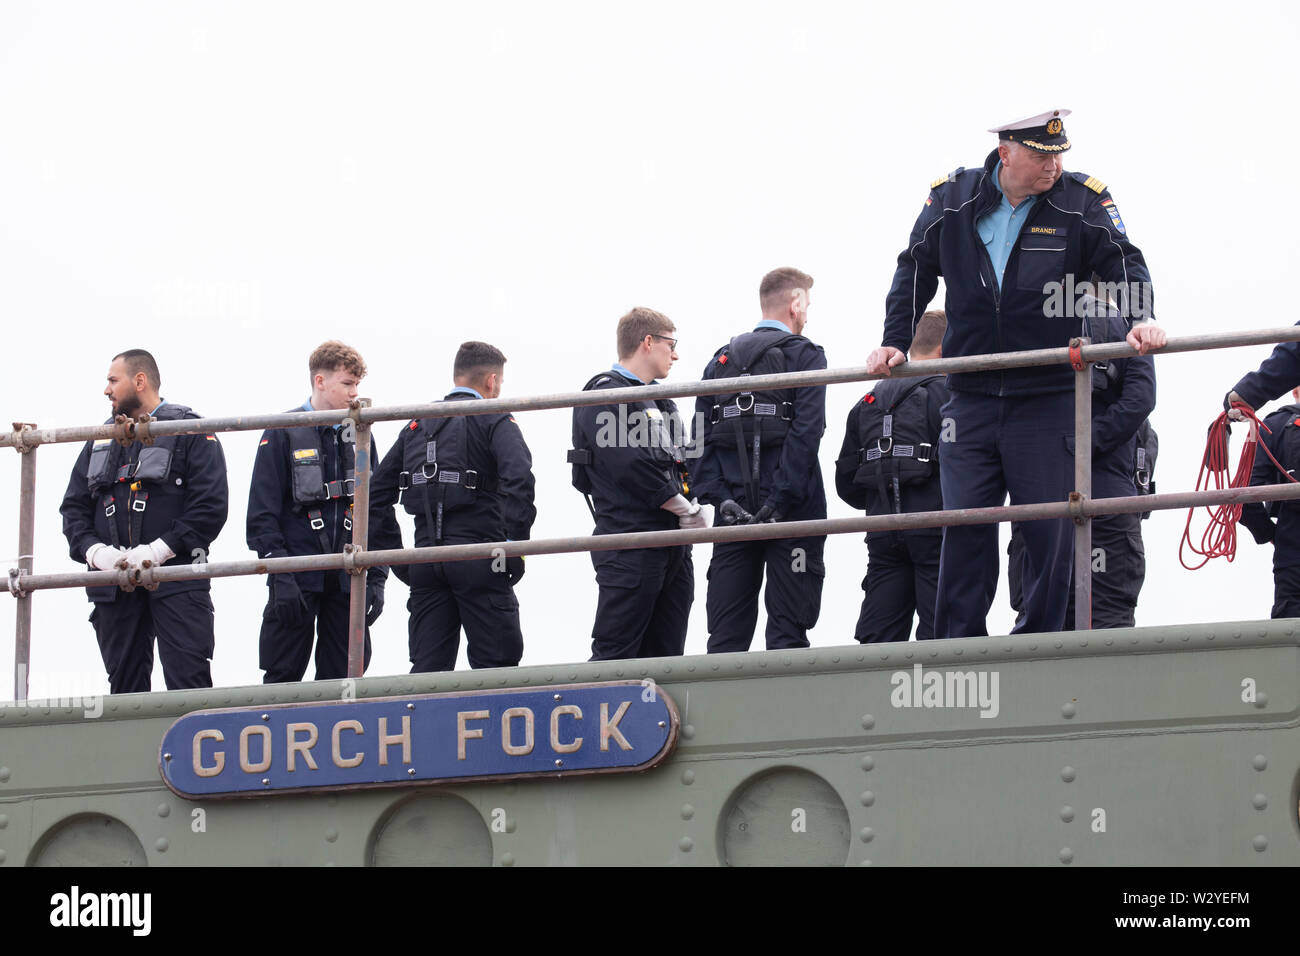 Bern, Germany. 11th July, 2019. Commander Nils Brandt (r) and other crew members are on board when the naval training ship 'Gorch Fock' docks at the Fassmer shipyard. At the shipyard the 'Gorch Fock' is lifted out of the water. In an assembly hall, workers from the Elfleth shipyard are making further progress with the restoration of the ship. Credit: Jörg Sarbach/dpa/Alamy Live News Stock Photo